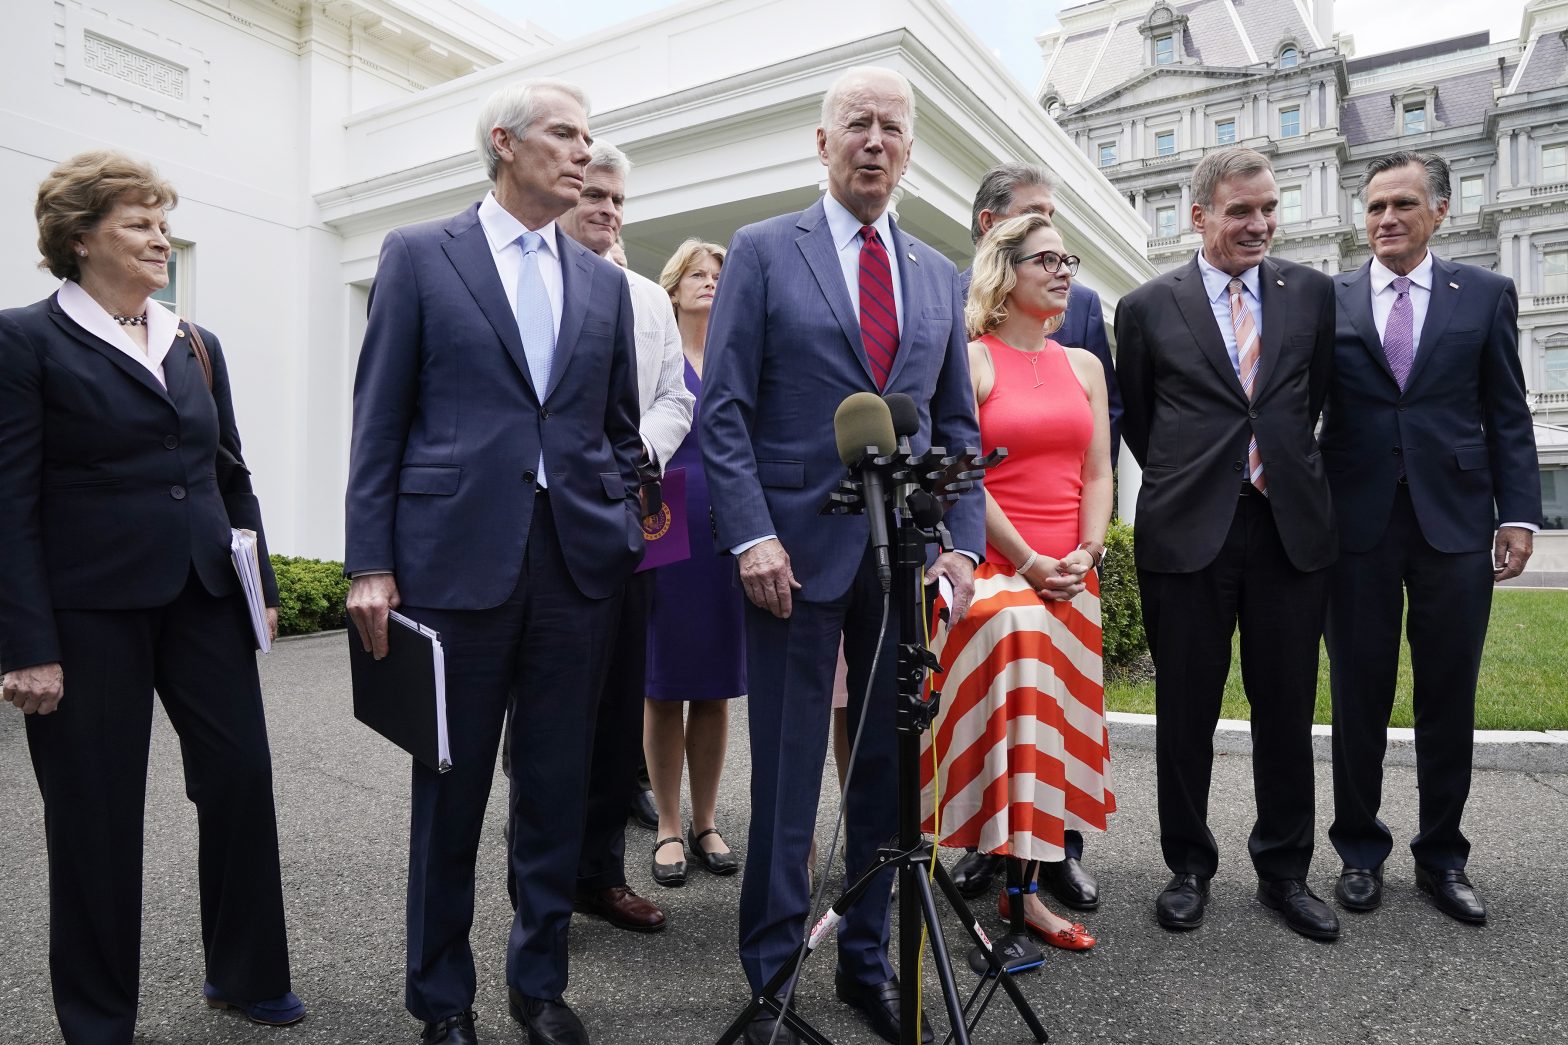 Bipartisan Efforts Win the Day As Senators, White House Strike Infrastructure Deal